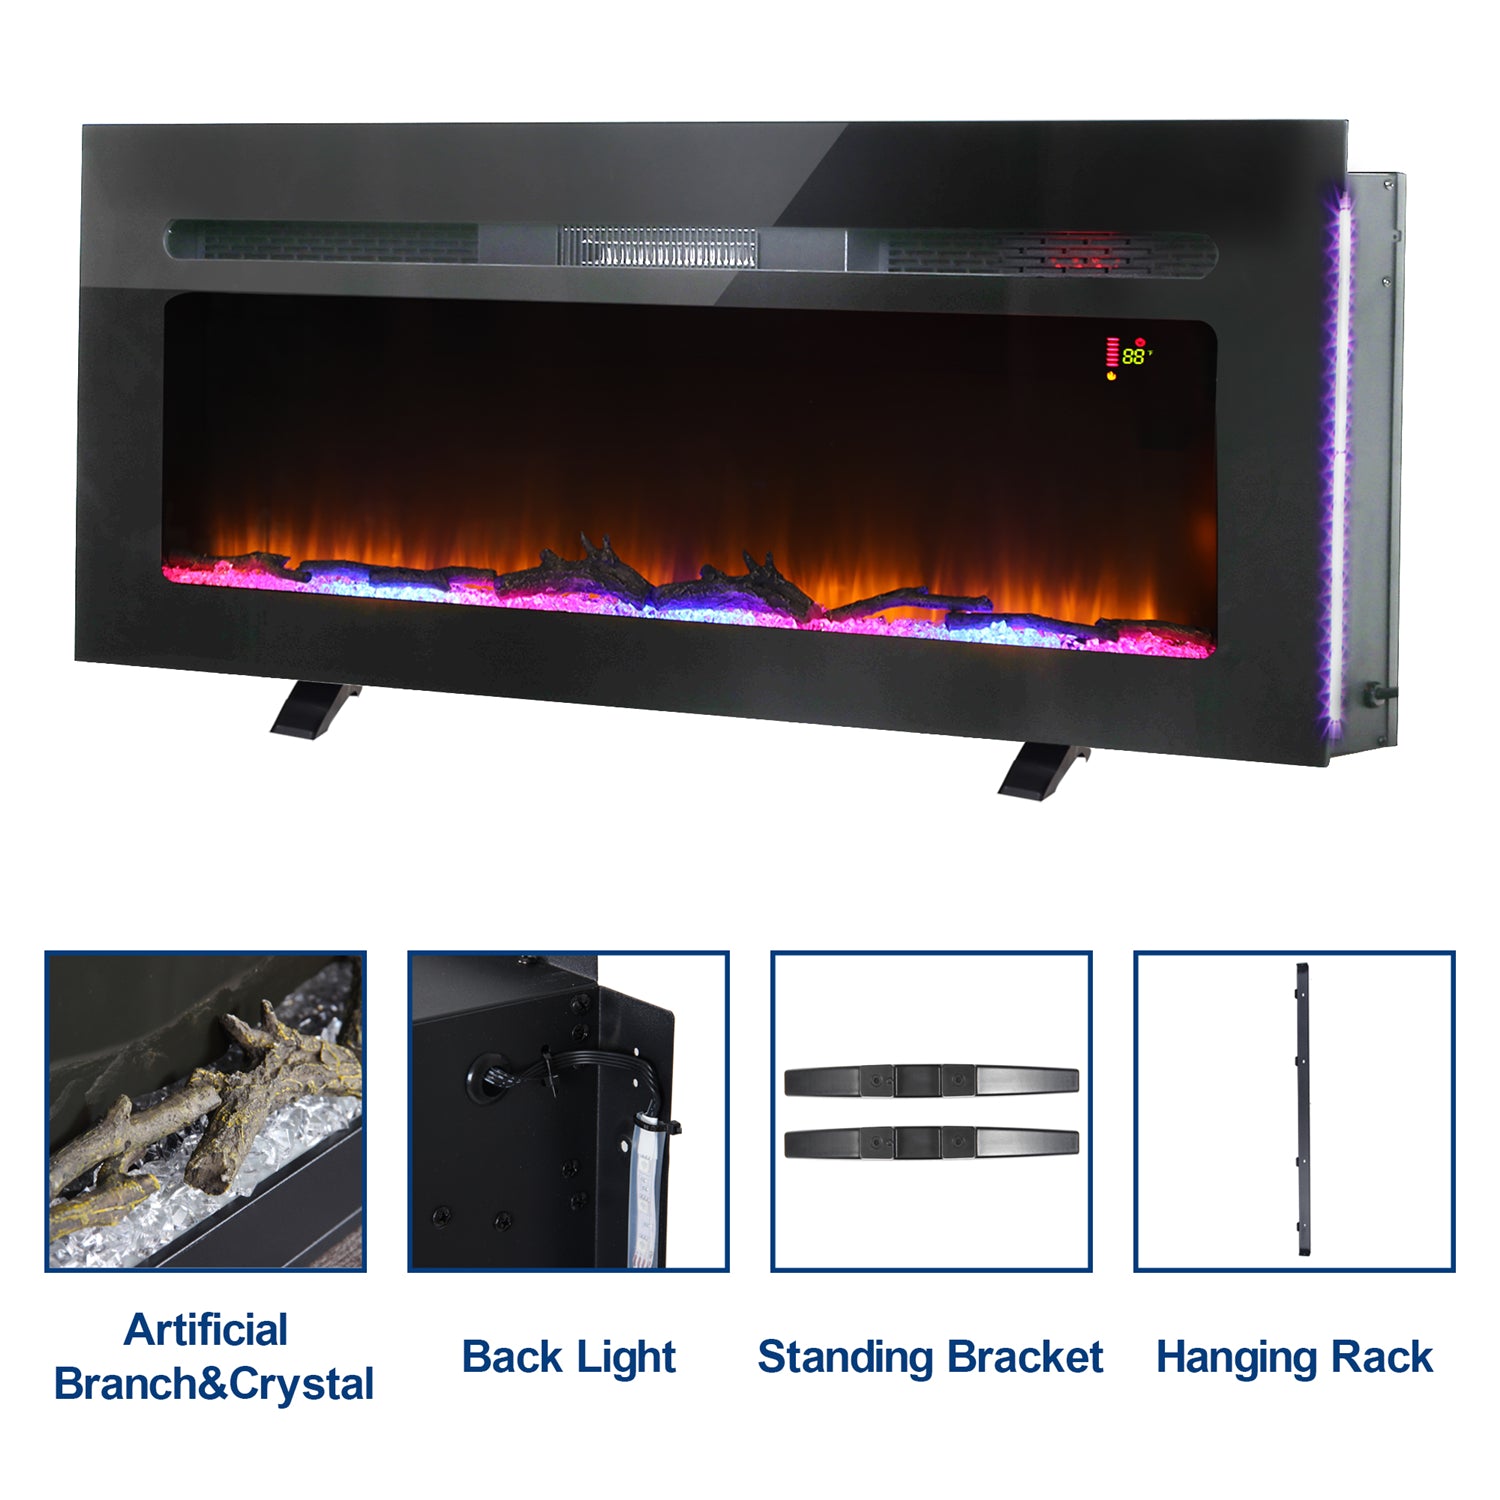 Sophia & William 40/50 inch Electric Fireplace, Insert & Wall Mounted Electric Space Heater for The Living Room, 1500W